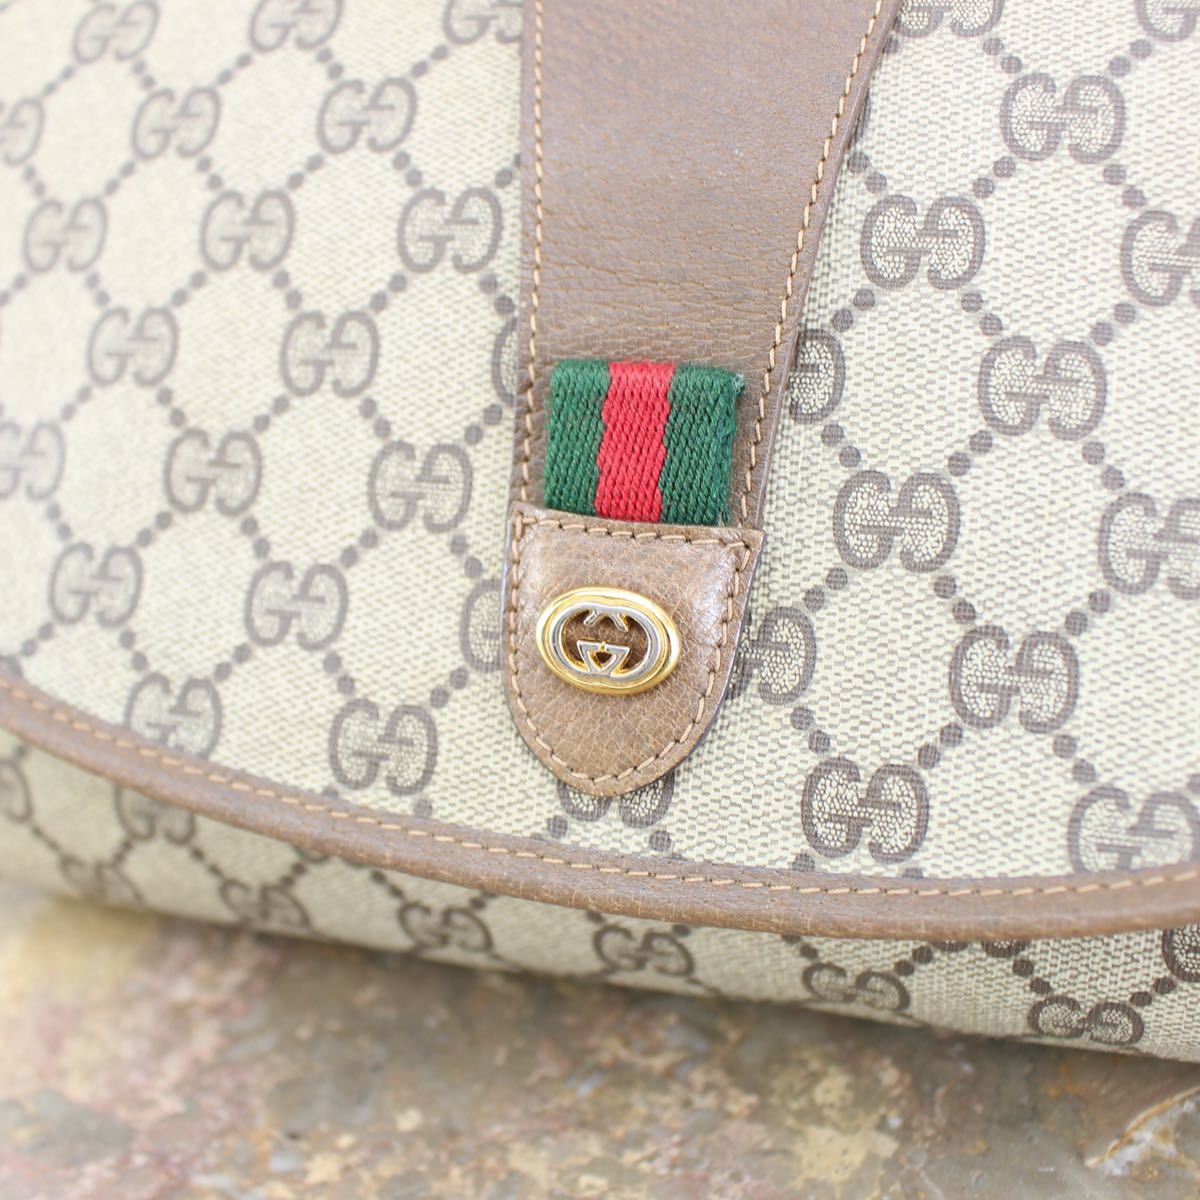 OLD GUCCI SHERRY LINE GG PATTERNED CLUTCH BAG MADE IN ITALY/オールドグッチシェリーラインGG柄クラッチバッグ_画像2